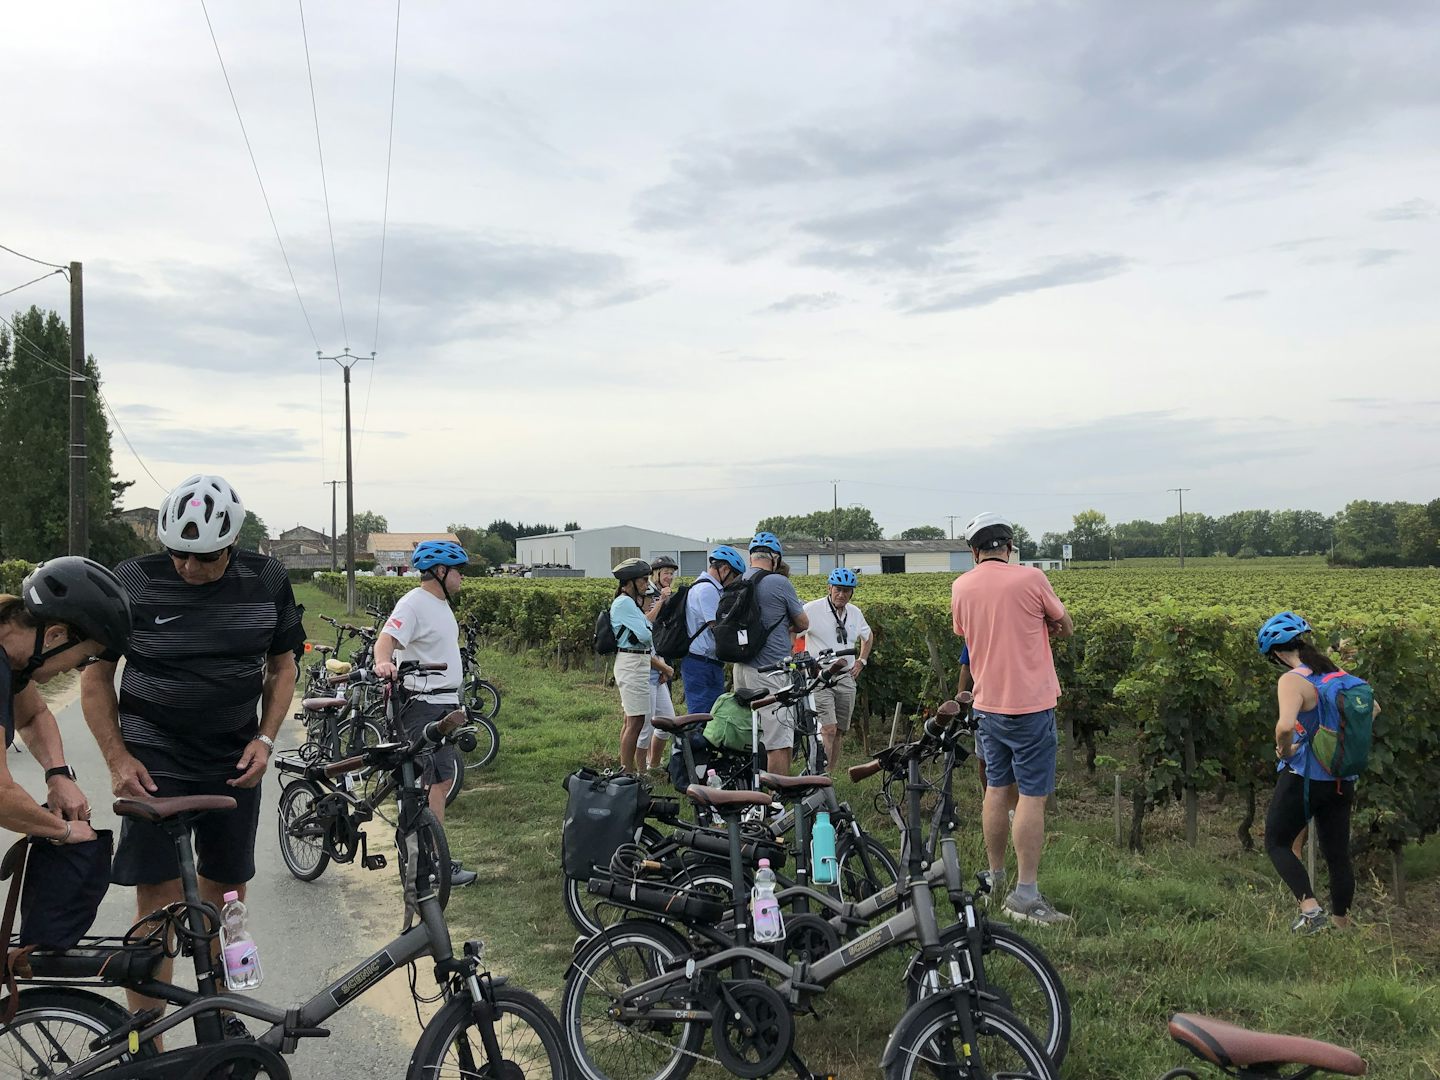 Cycling in the Medoc wine region